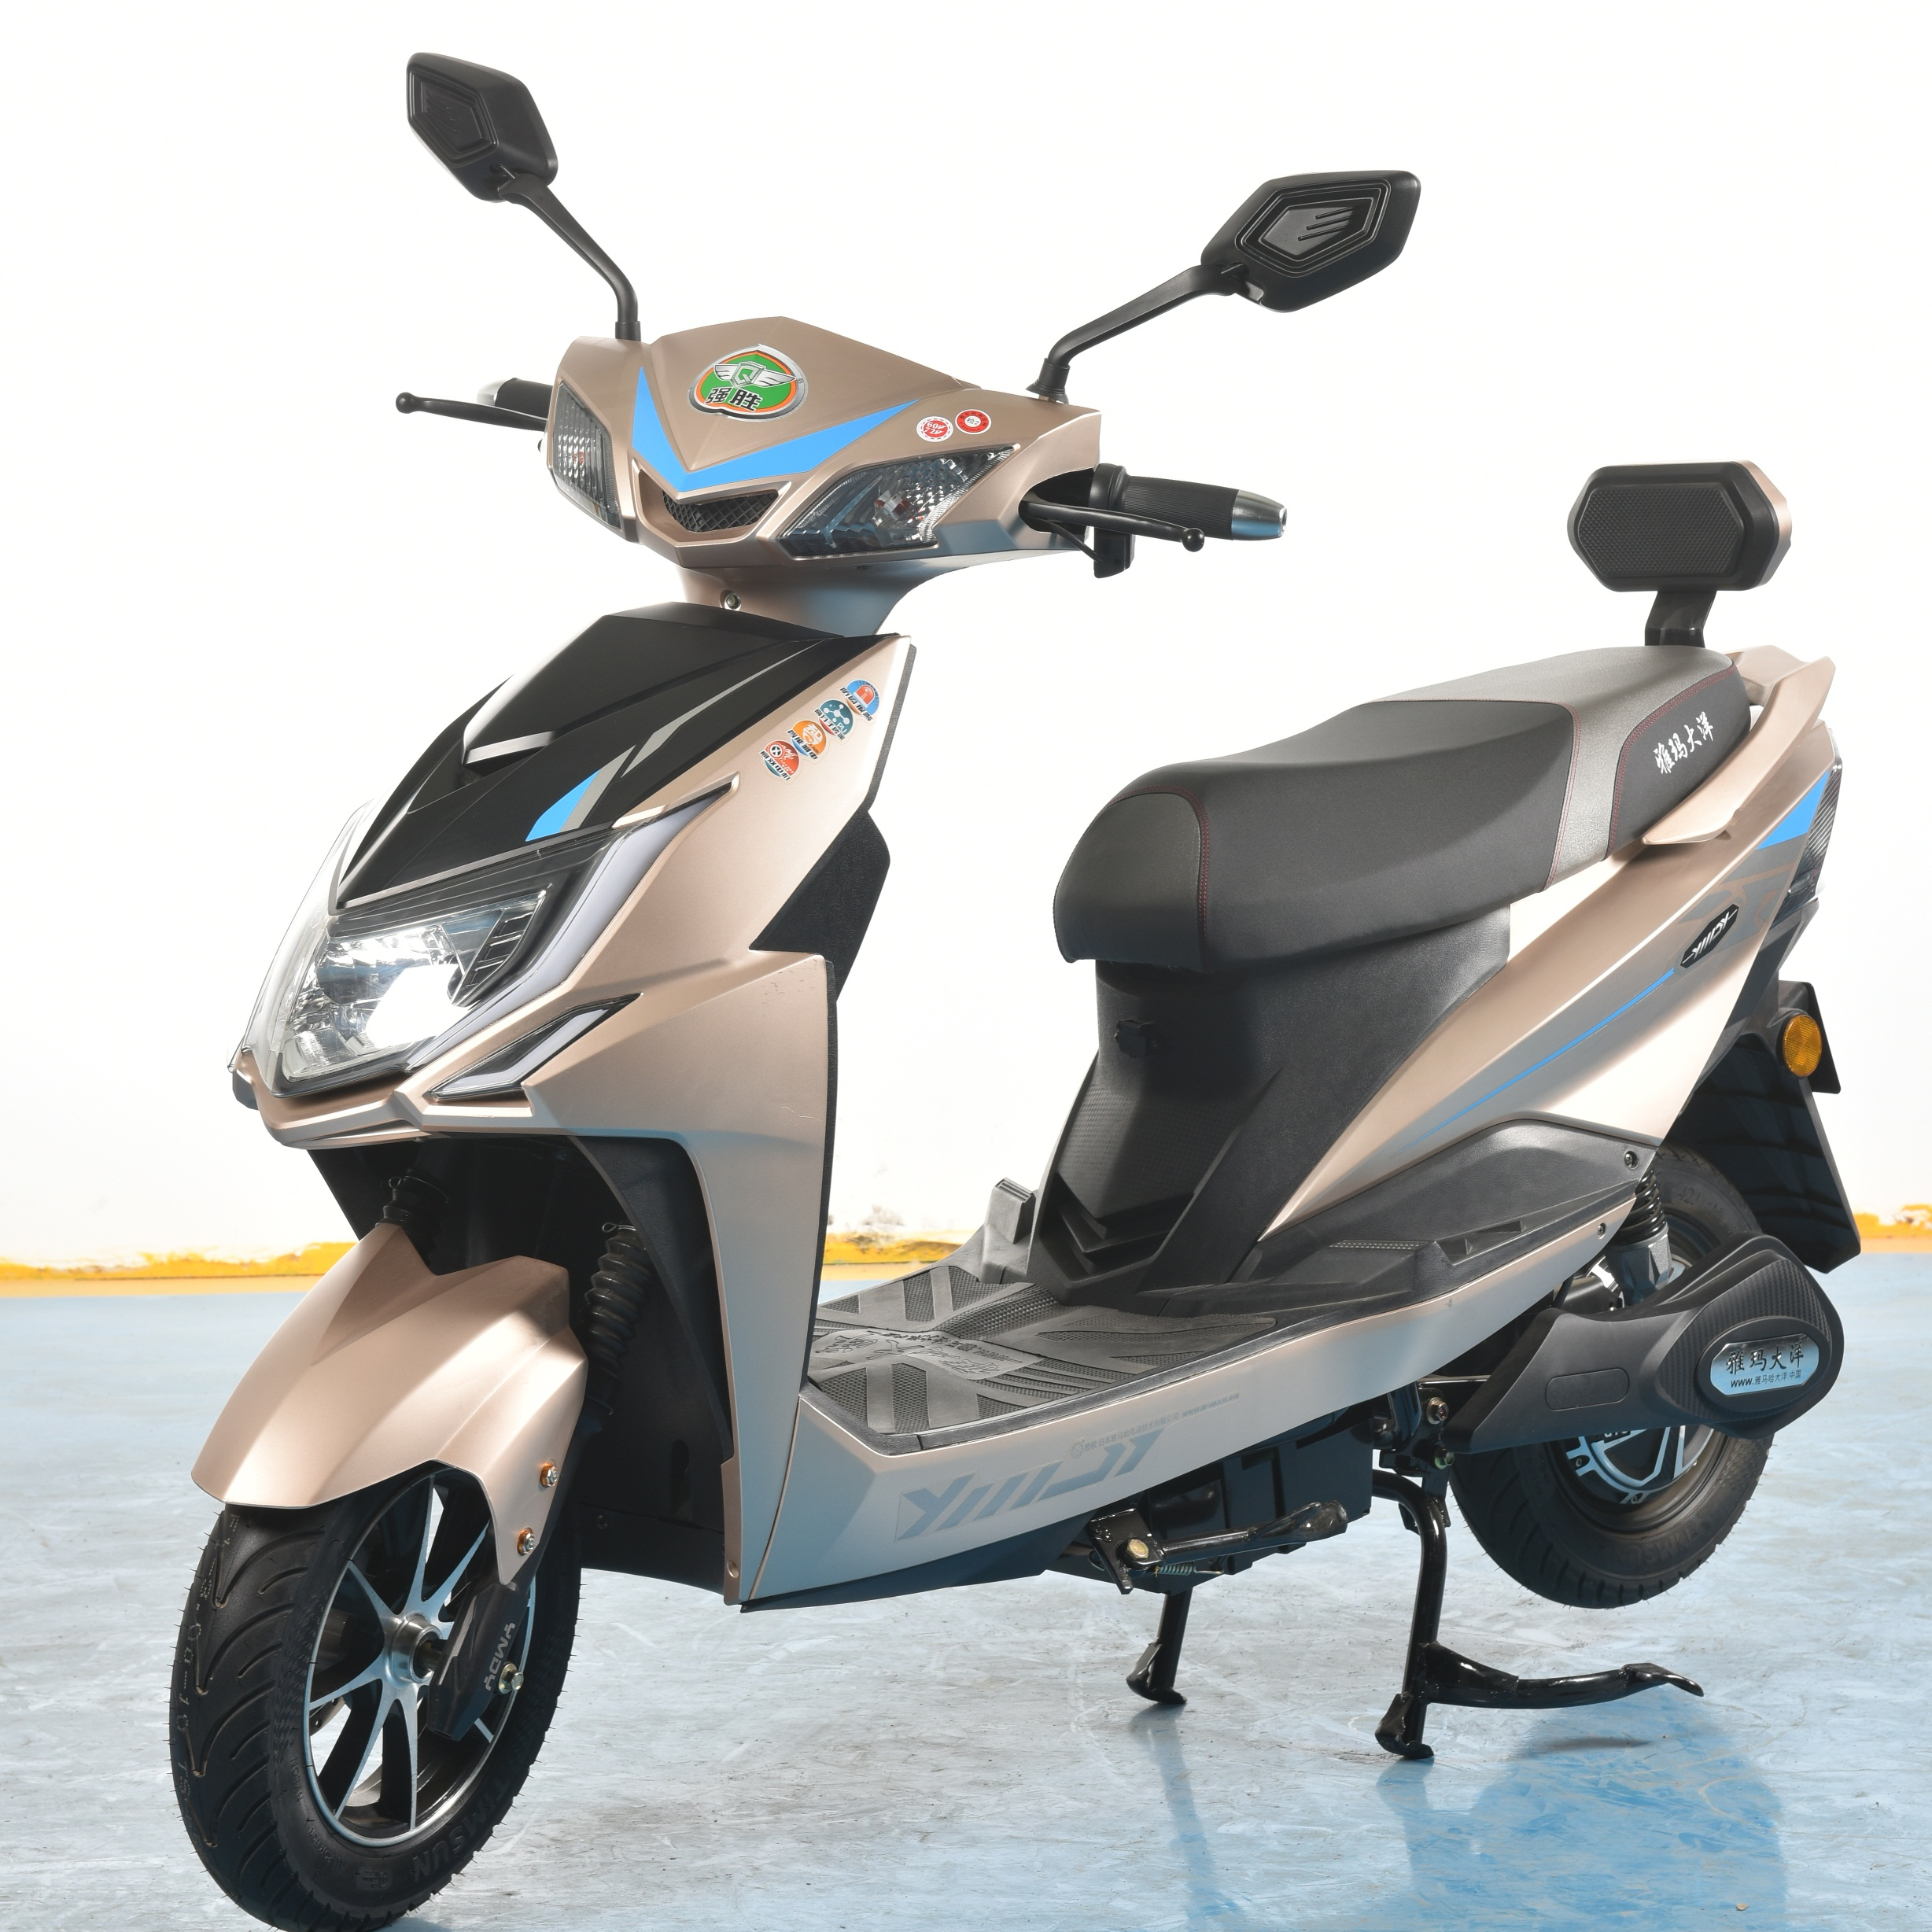 2020 hot sale bajaj electric  two wheel  tricycle ECO friendly  baja electric bike on sale Cheaper electric auto scooter price